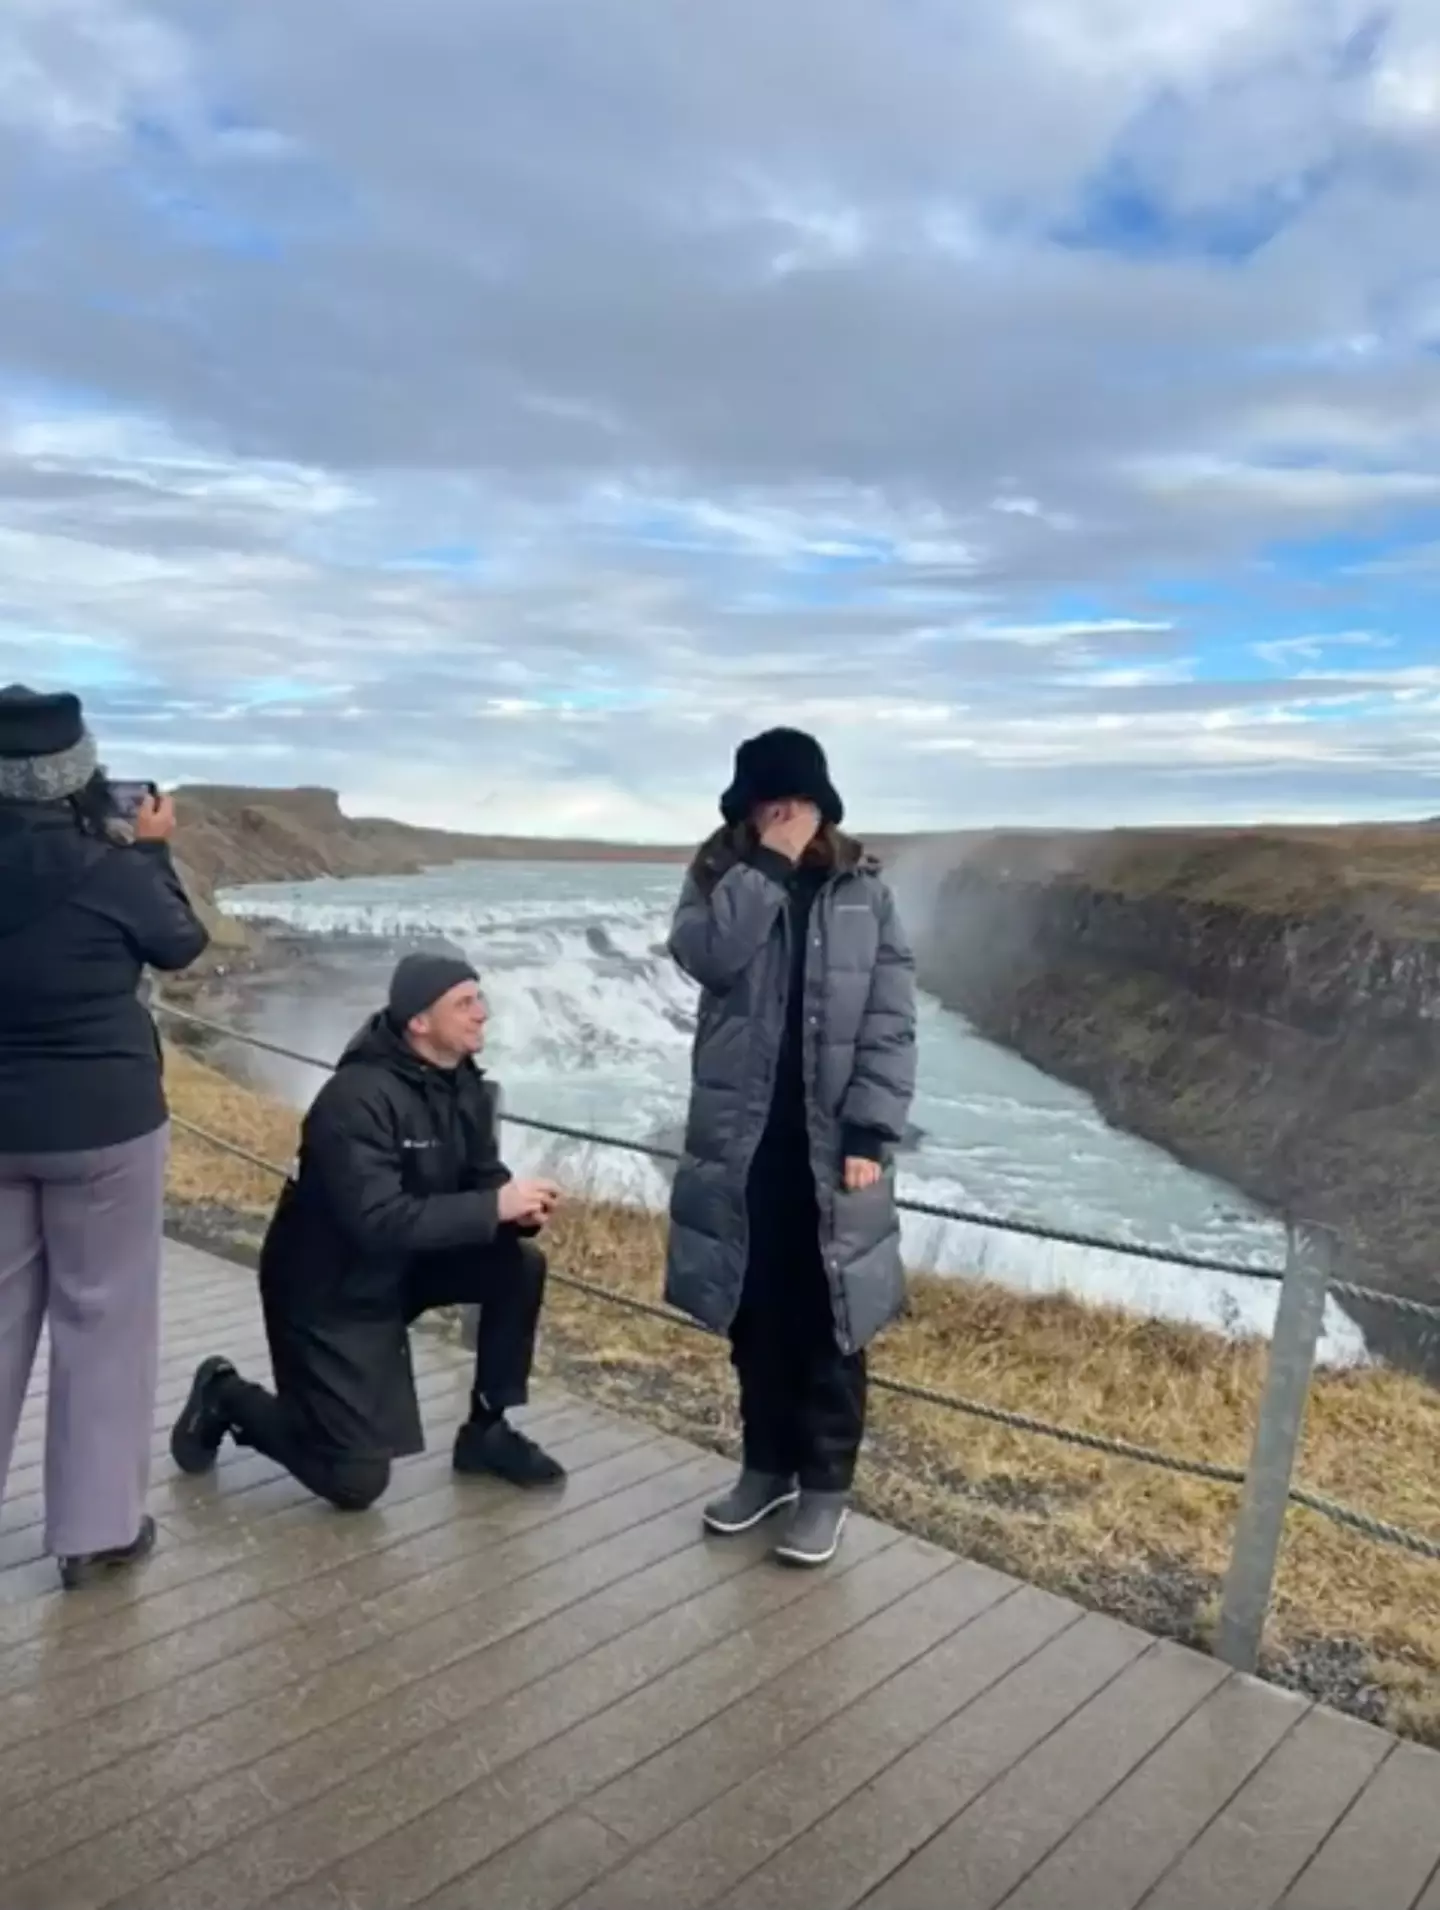 The tourist was seen taking photos of the scenery during the entire proposal.